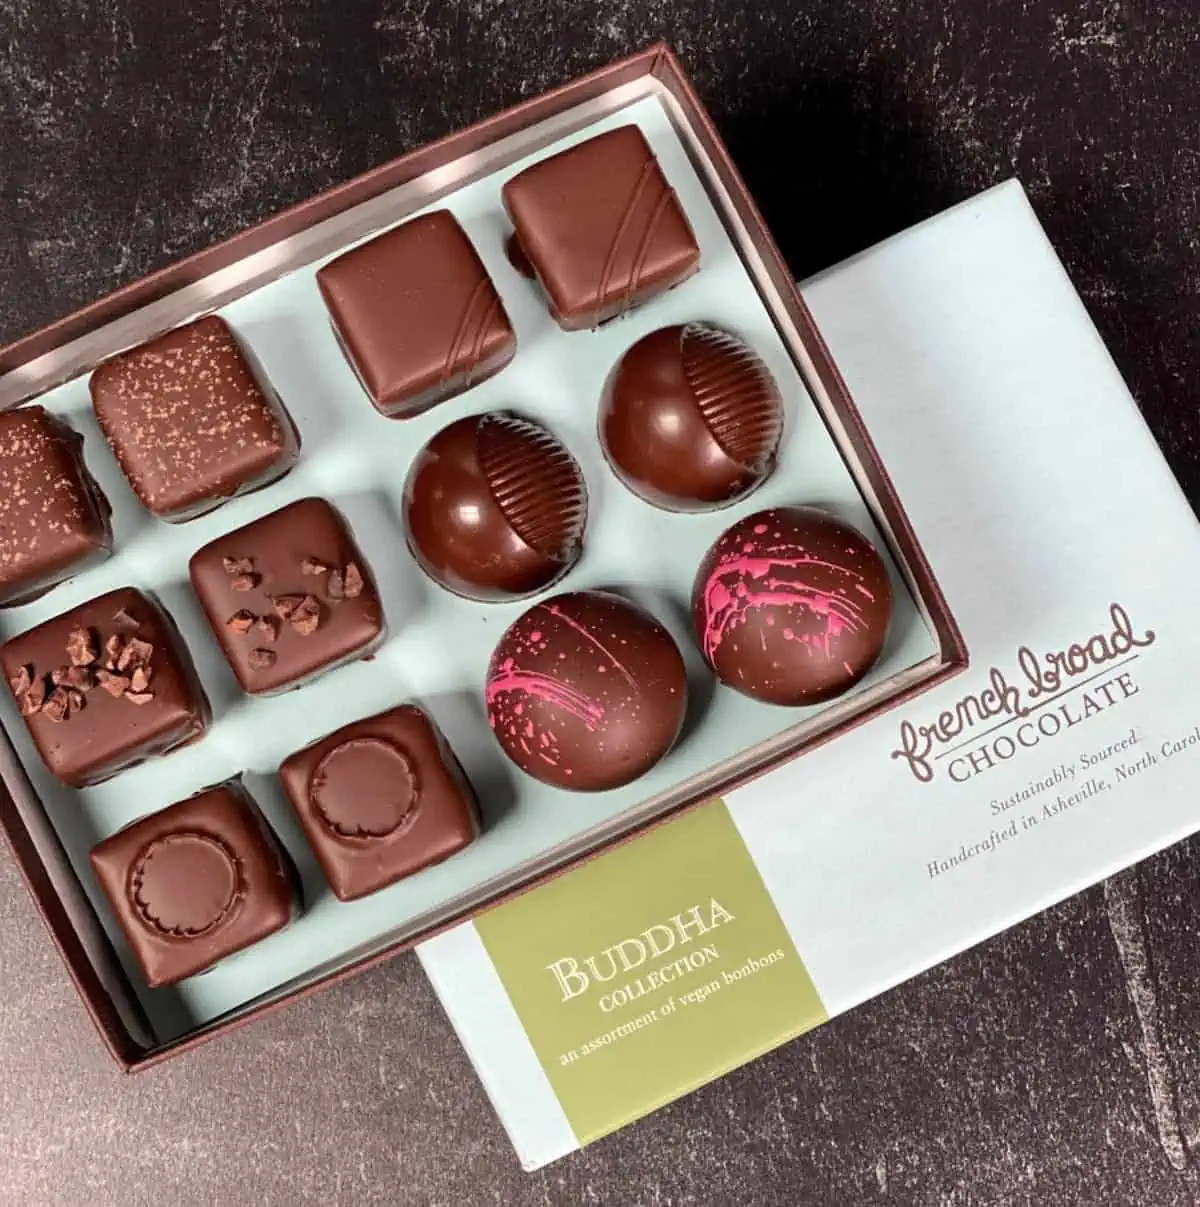 A vegan chocolate "Buddha Collection" from French Broad Chocolates in Asheville.